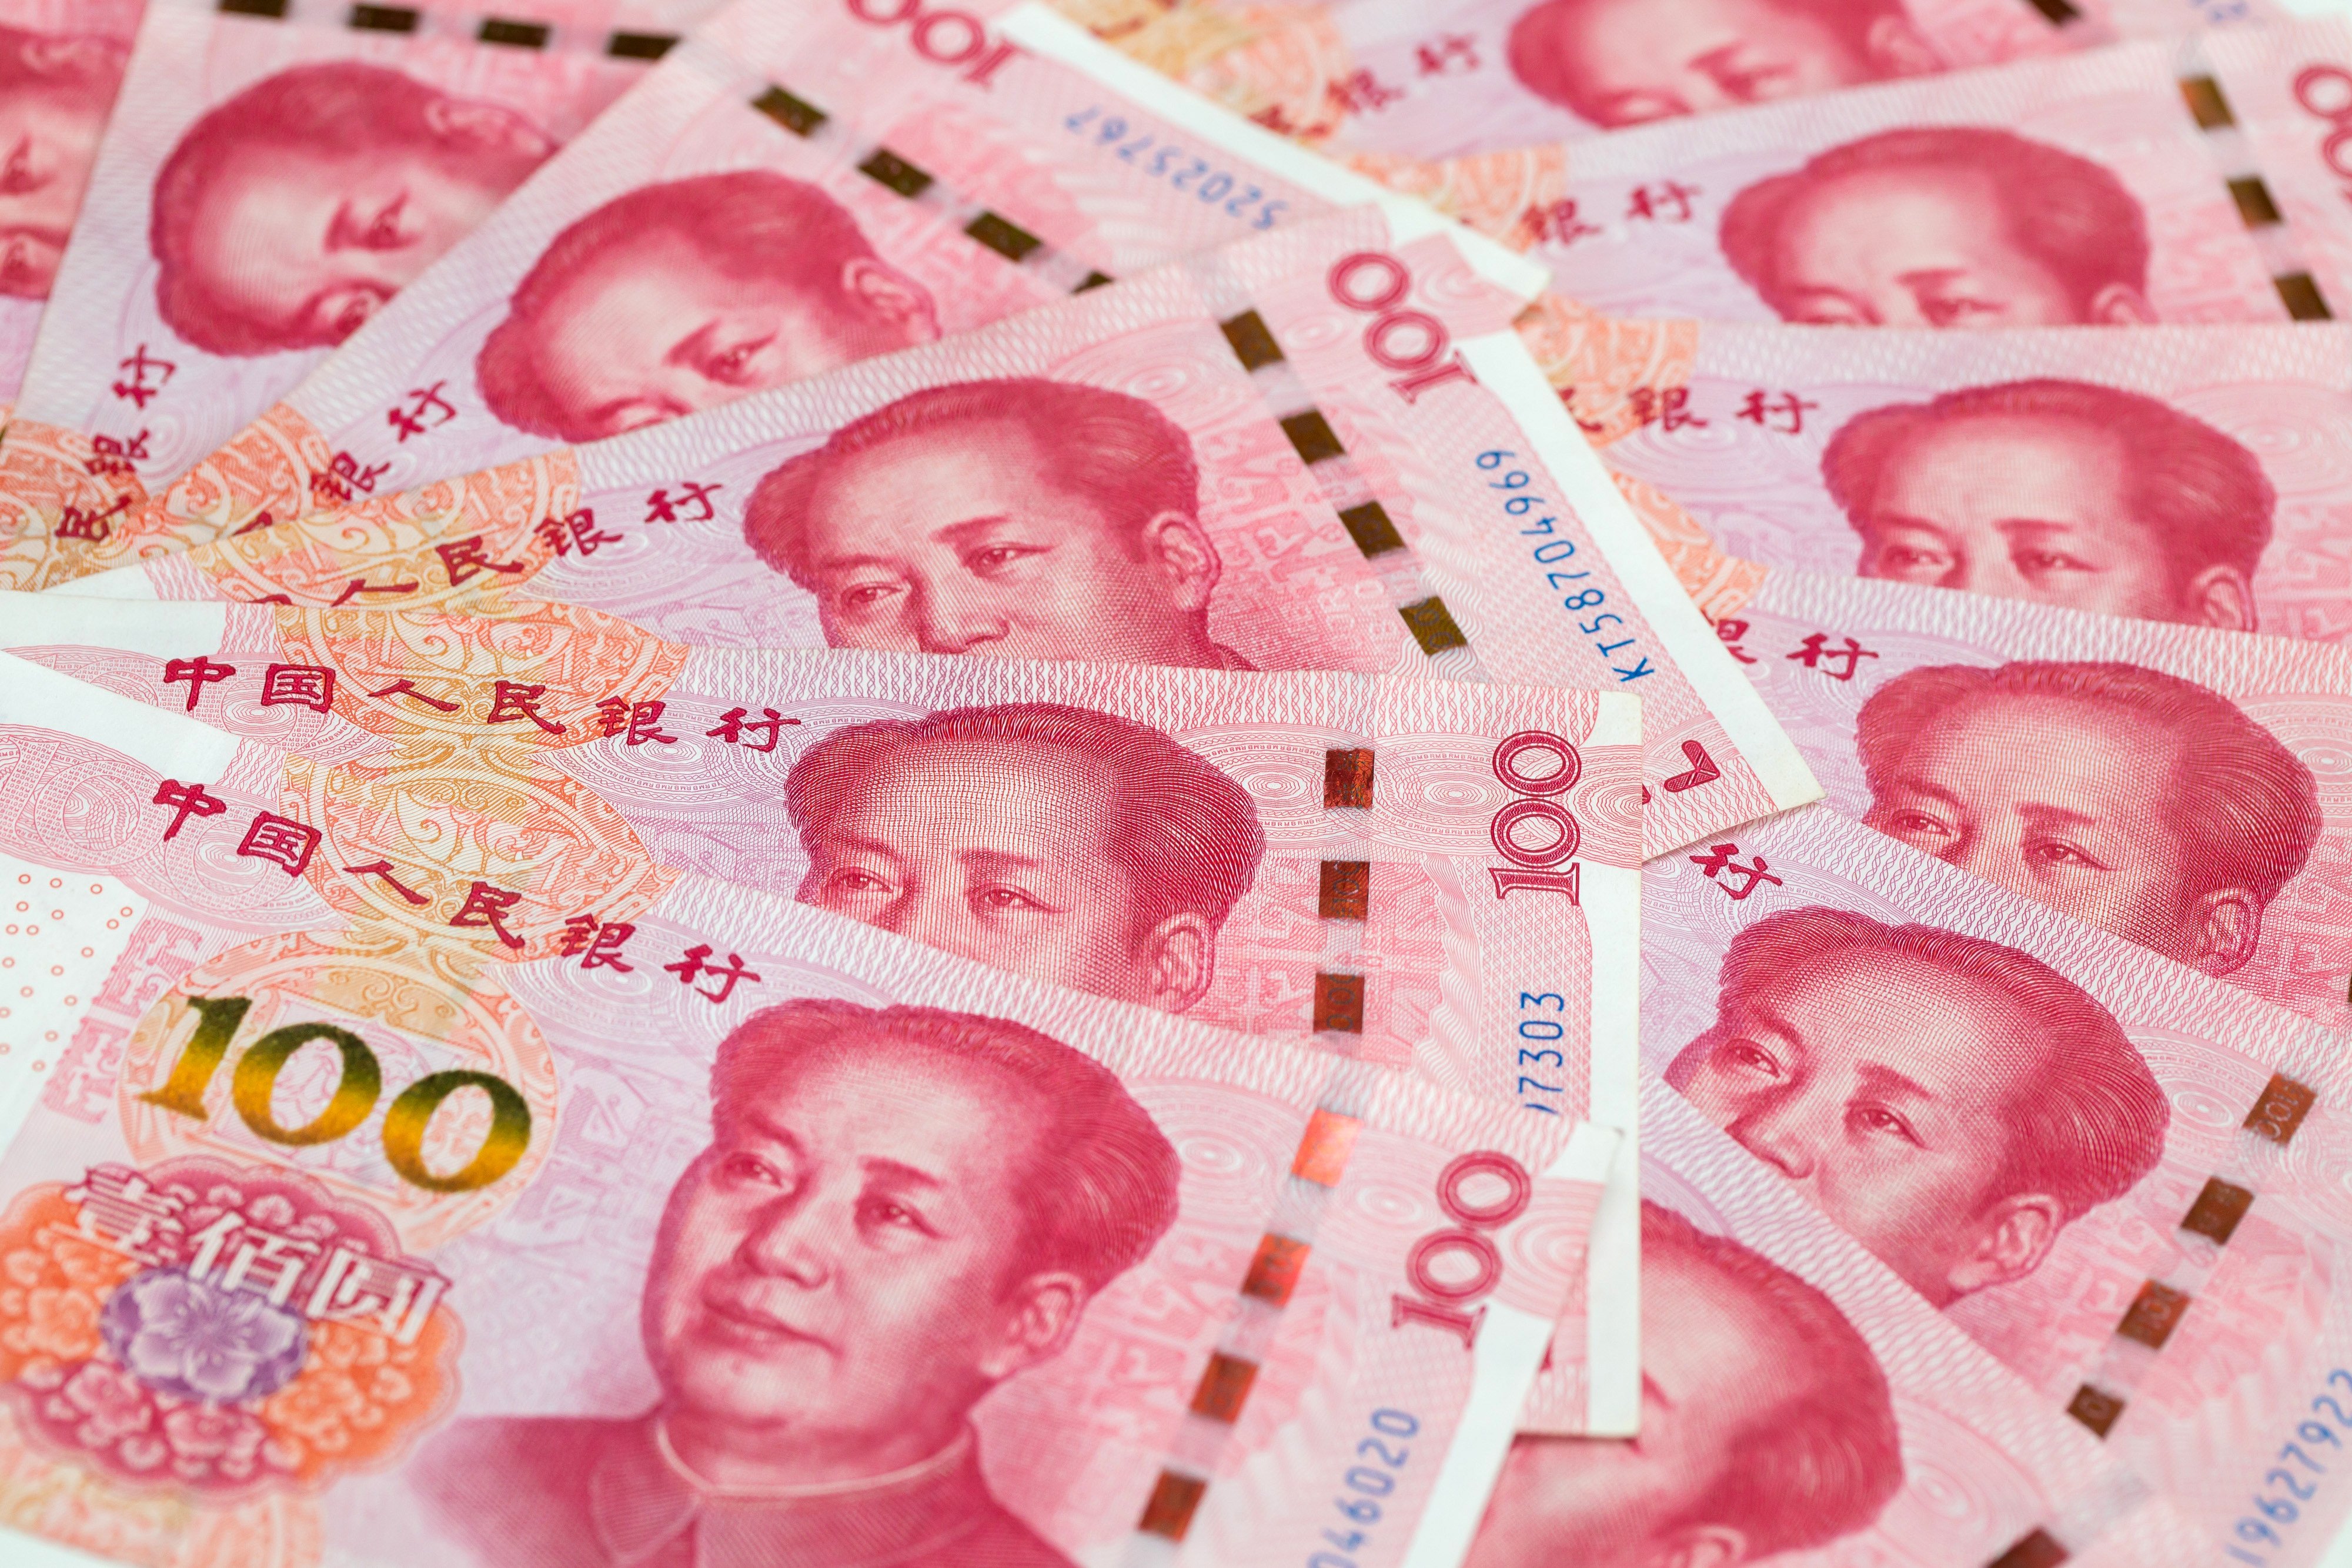 Use of the Chinese currency in belt and road deals helps avoid adding to the debt burdens of borrower countries, according to observers. Photo: Bloomberg